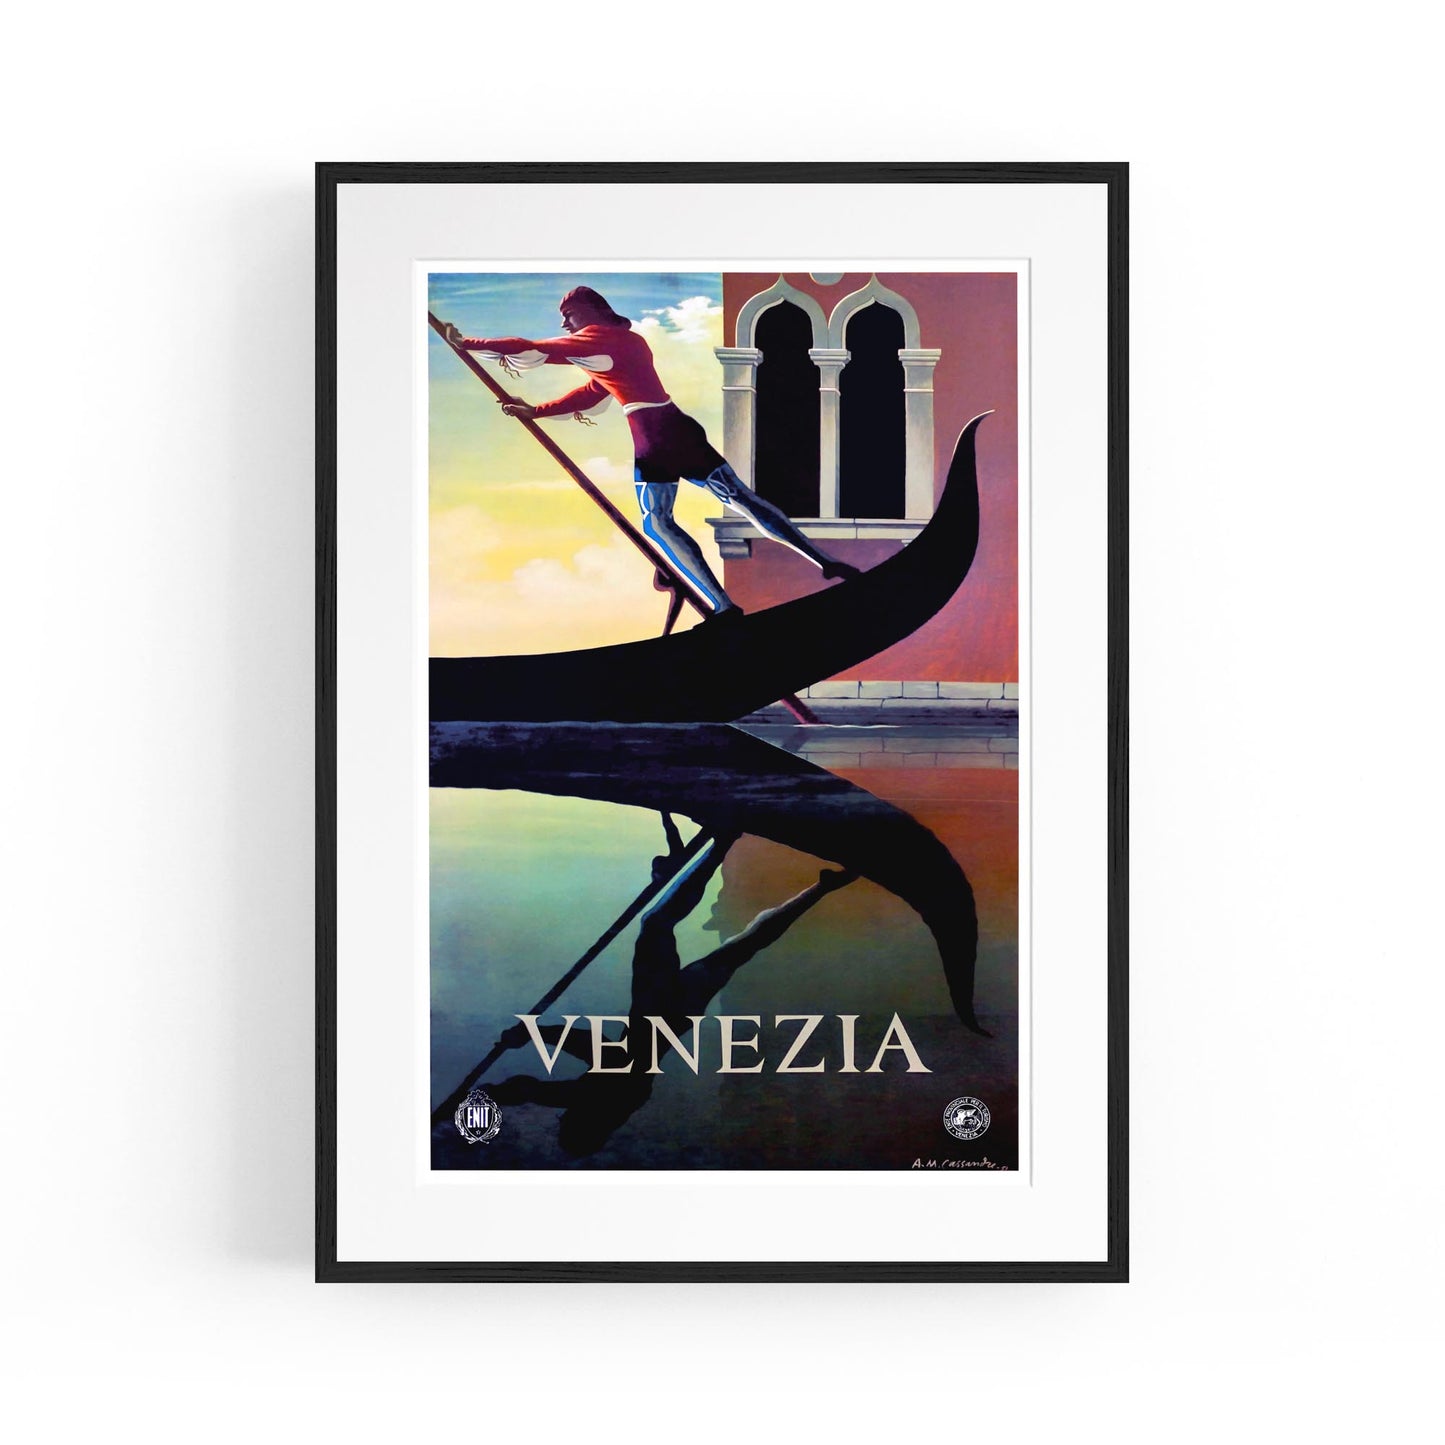 Venice, Italy by A.M Cassandre | Framed Vintage Travel Poster